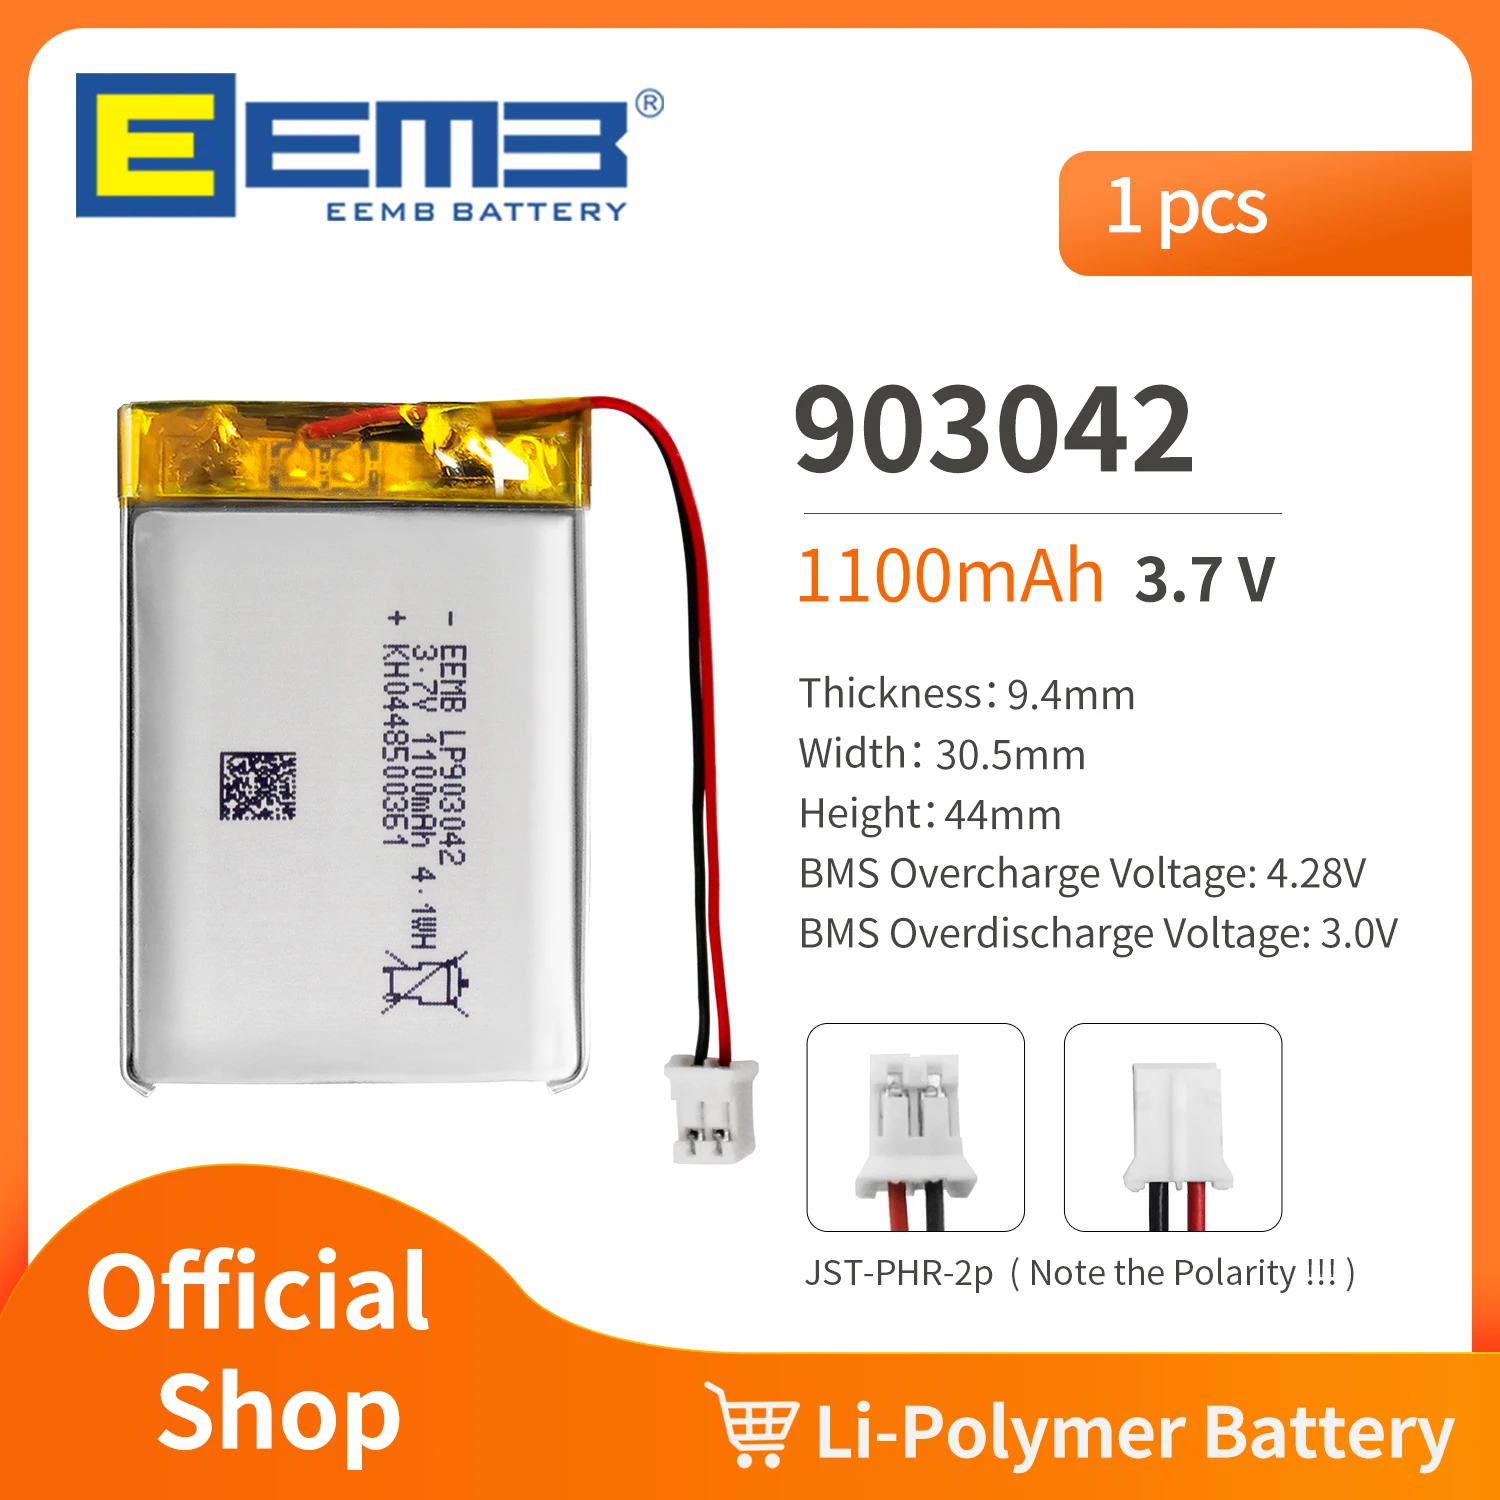 EEMB 903042 3.7V Battery 1900mAh Rechargeable Lithium Polymer Battery Pack For Dashcam,Flashlight,Bluetooth Speaker, GPS,Camera